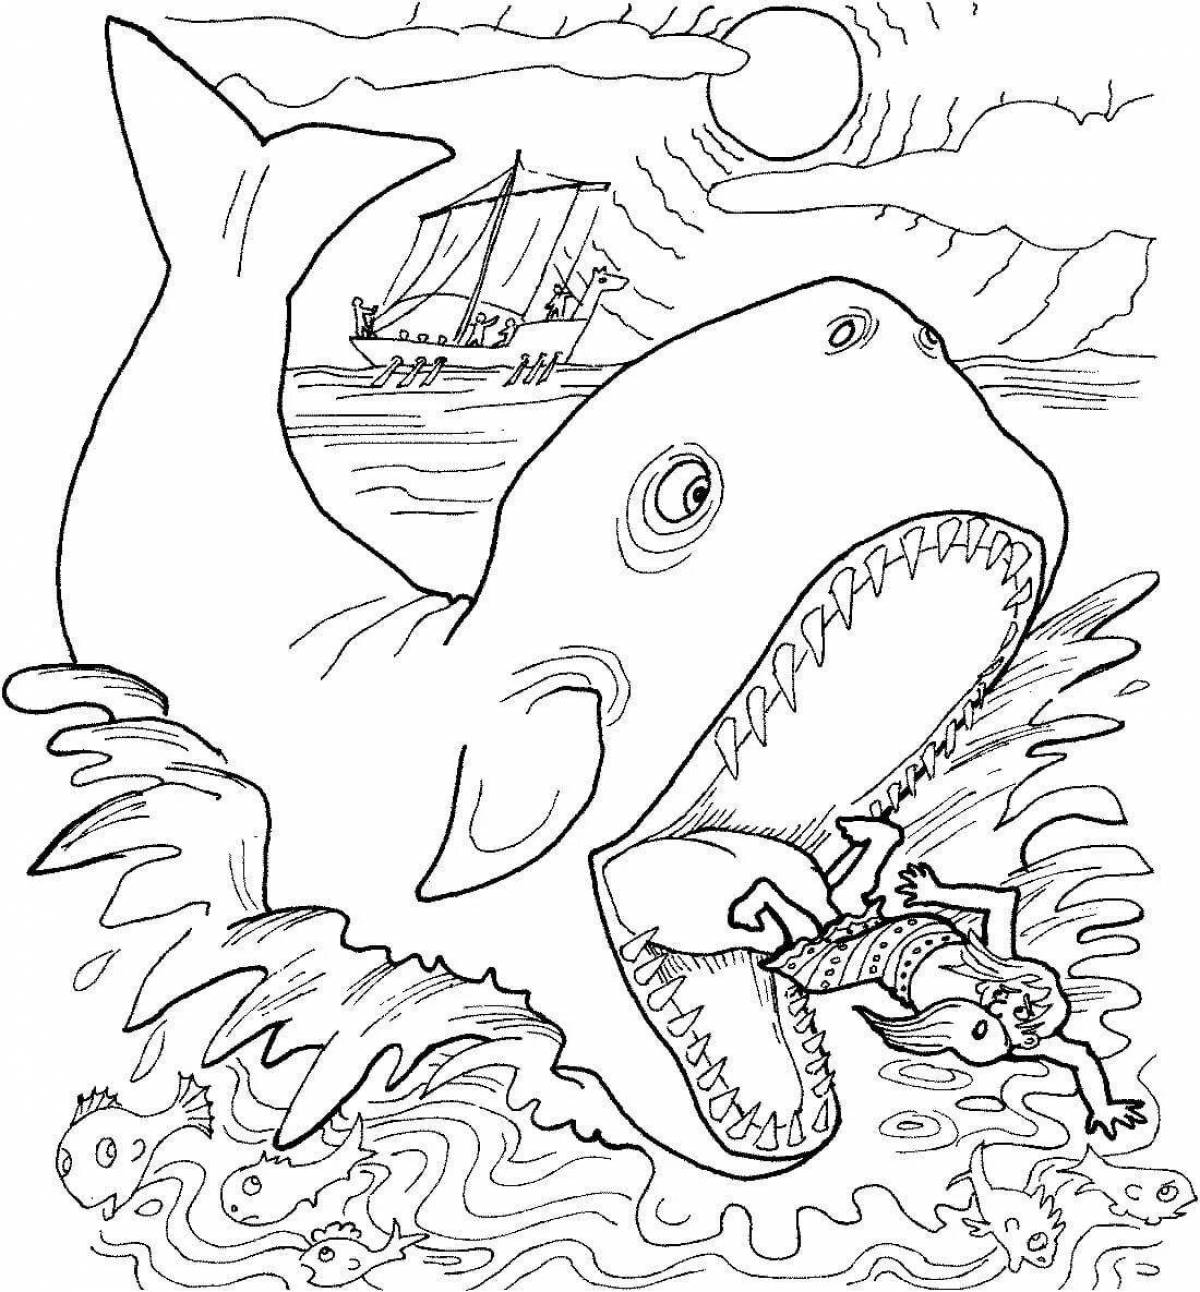 Fancy whale and iona coloring book